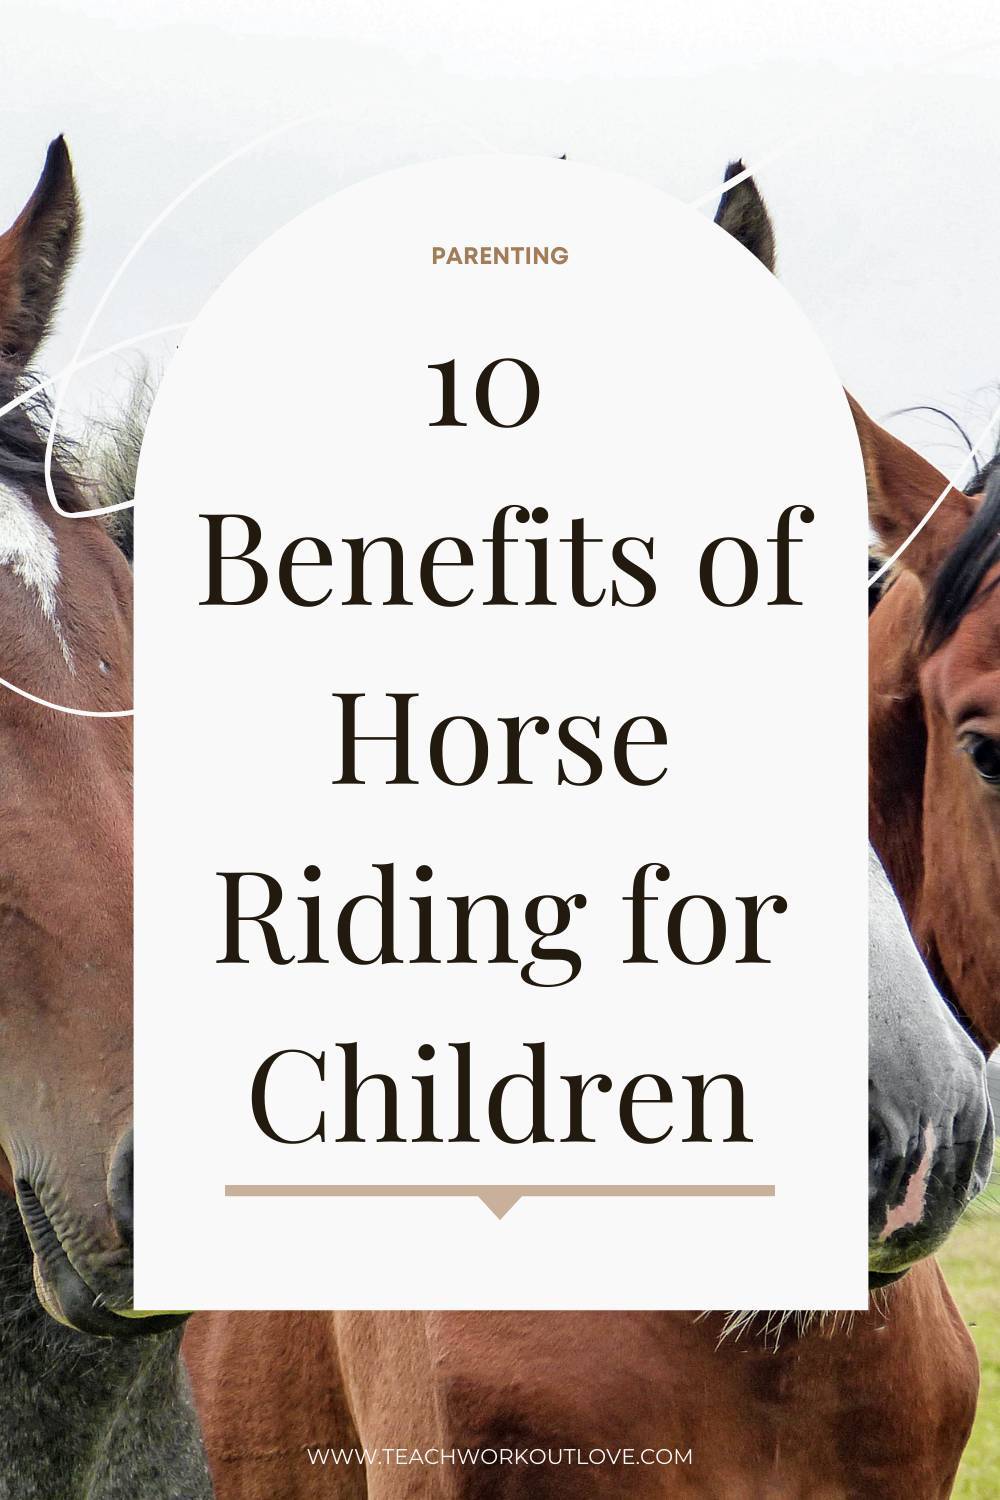 Bonding with a hooved friend can improve your child's well-being immensely. Check this article that reveals 10 benefits of horse riding.